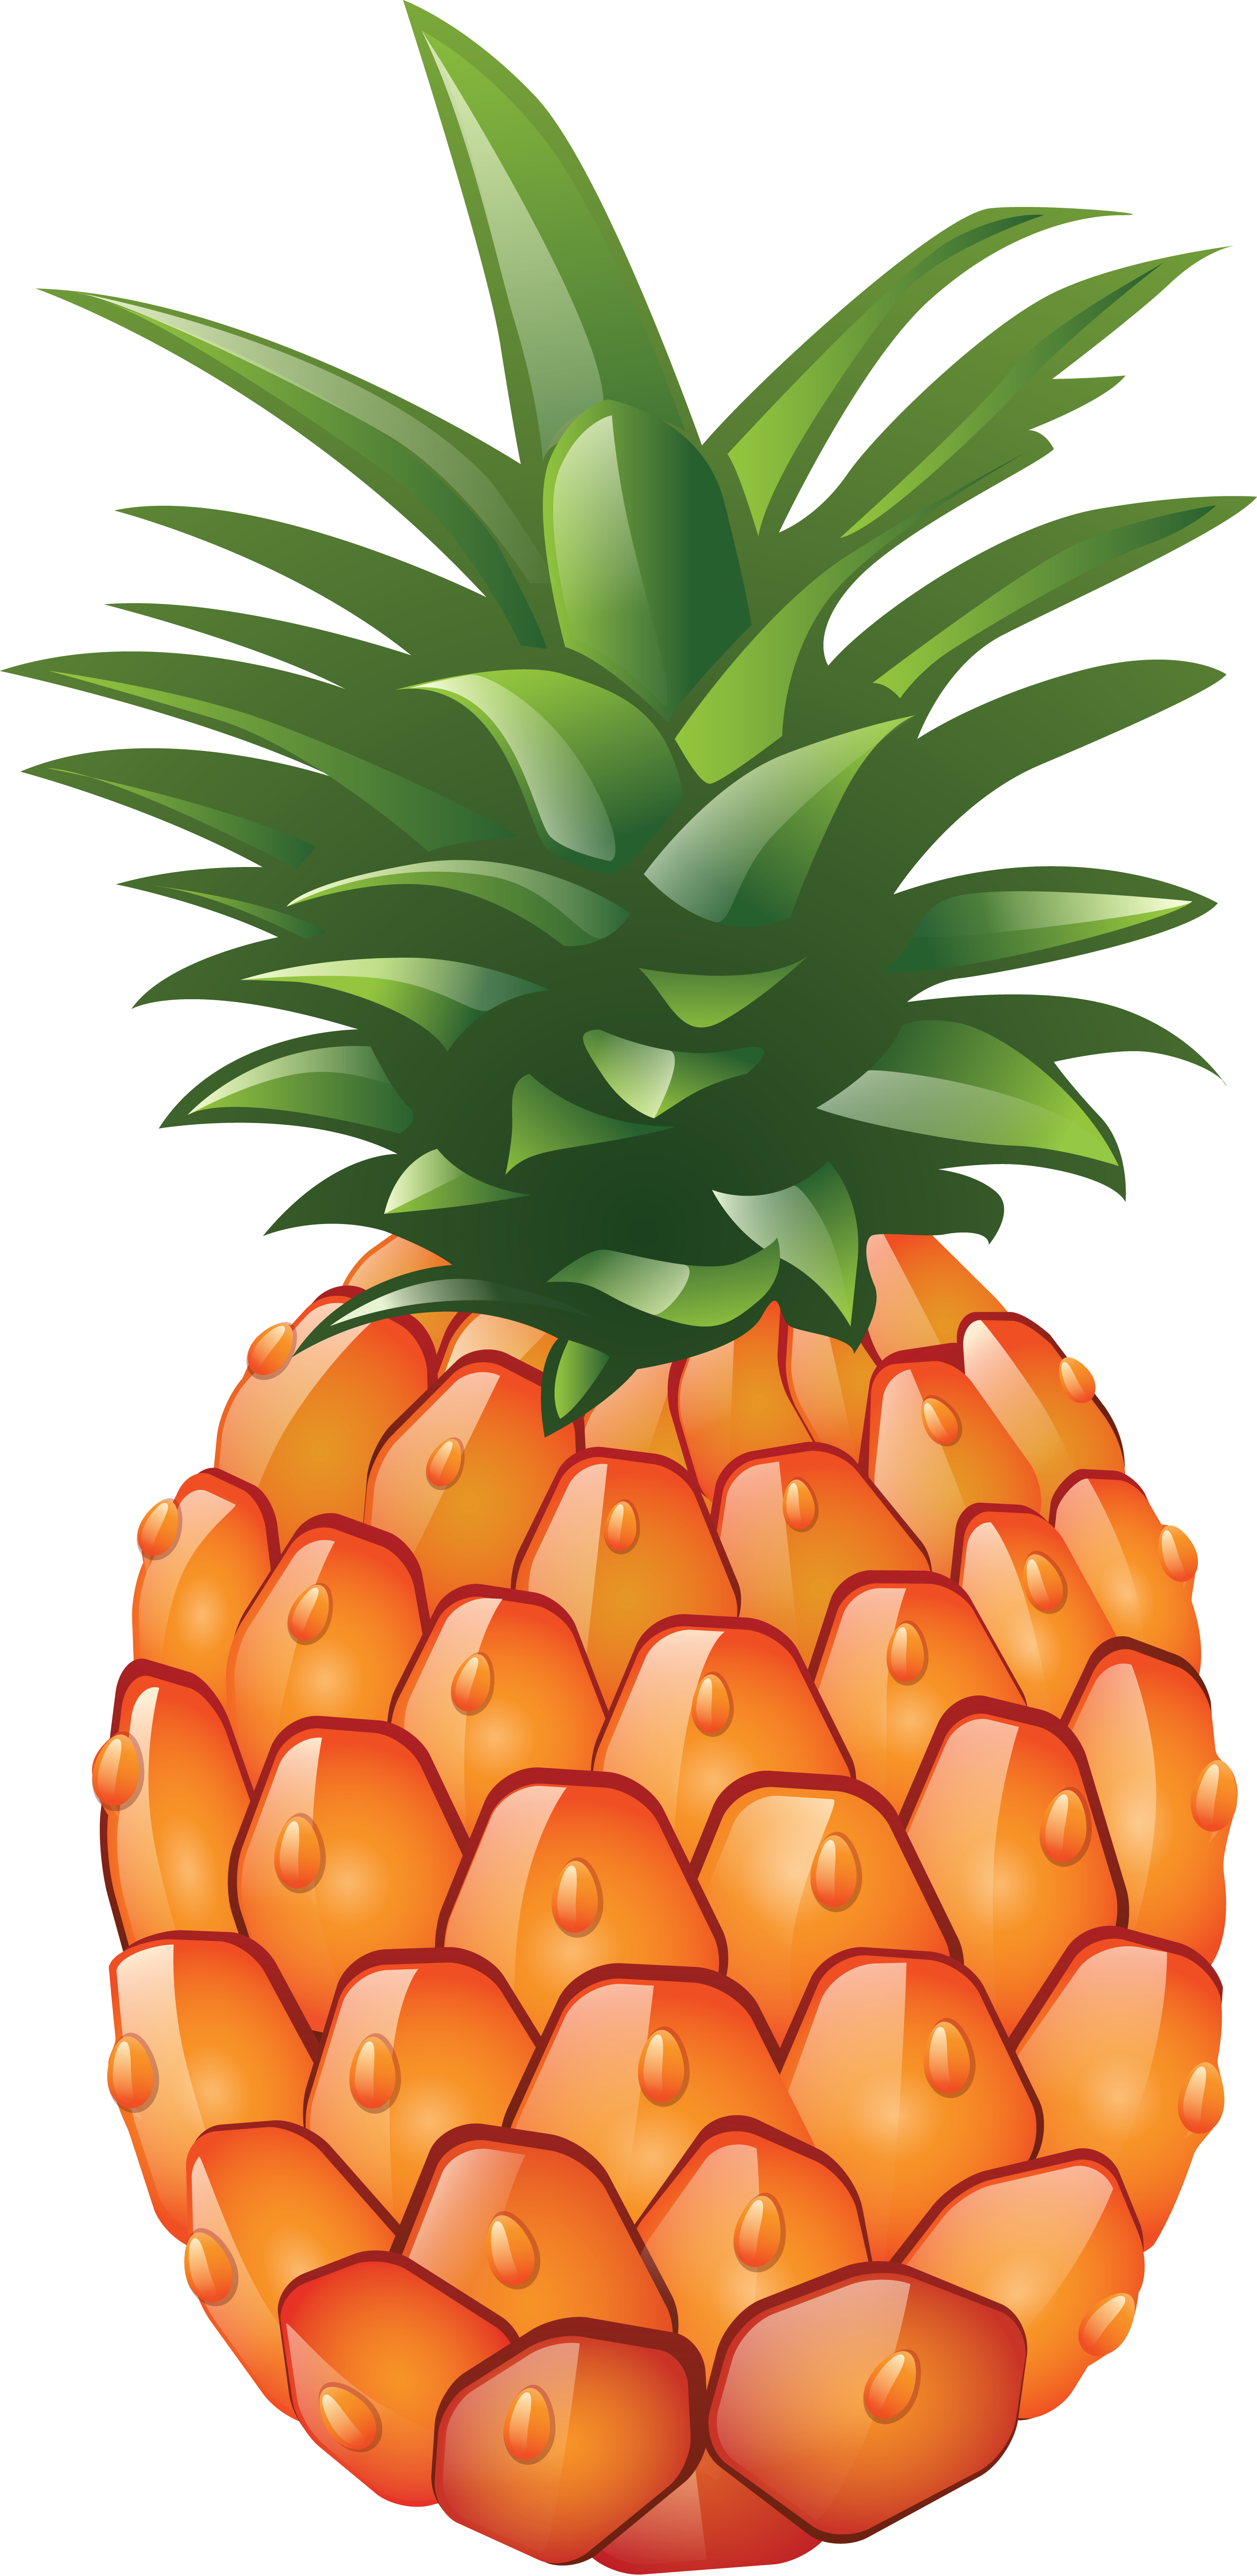 Fruit clipart silhouette. Pineapple png image free